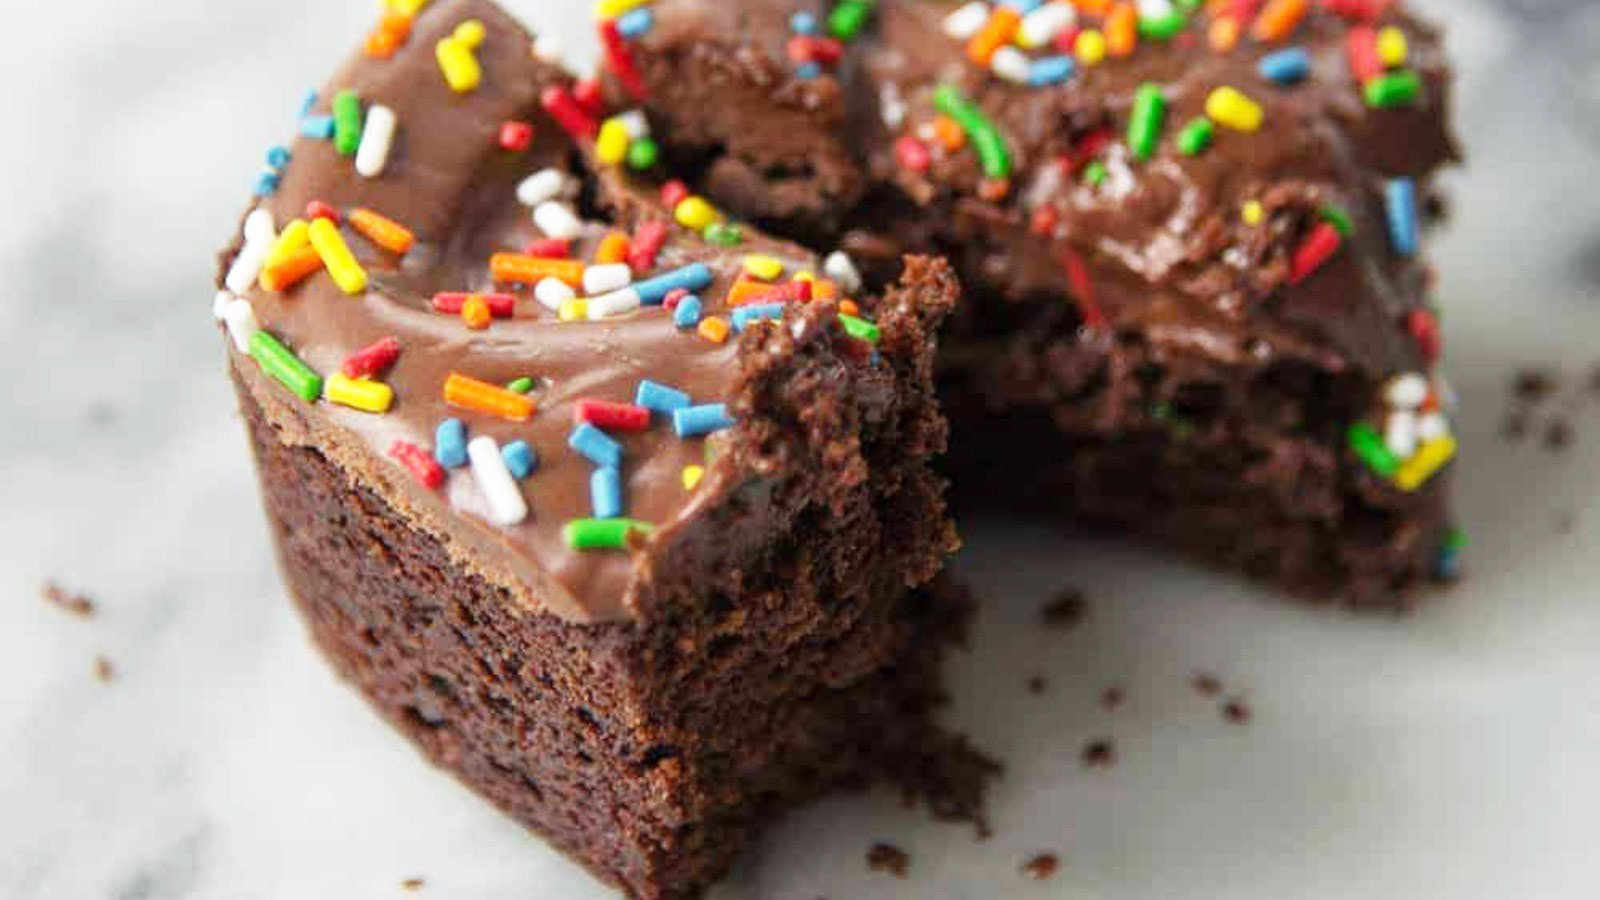 A closeup of a cut brownies with frosting and colored sprinkles on a white surface.